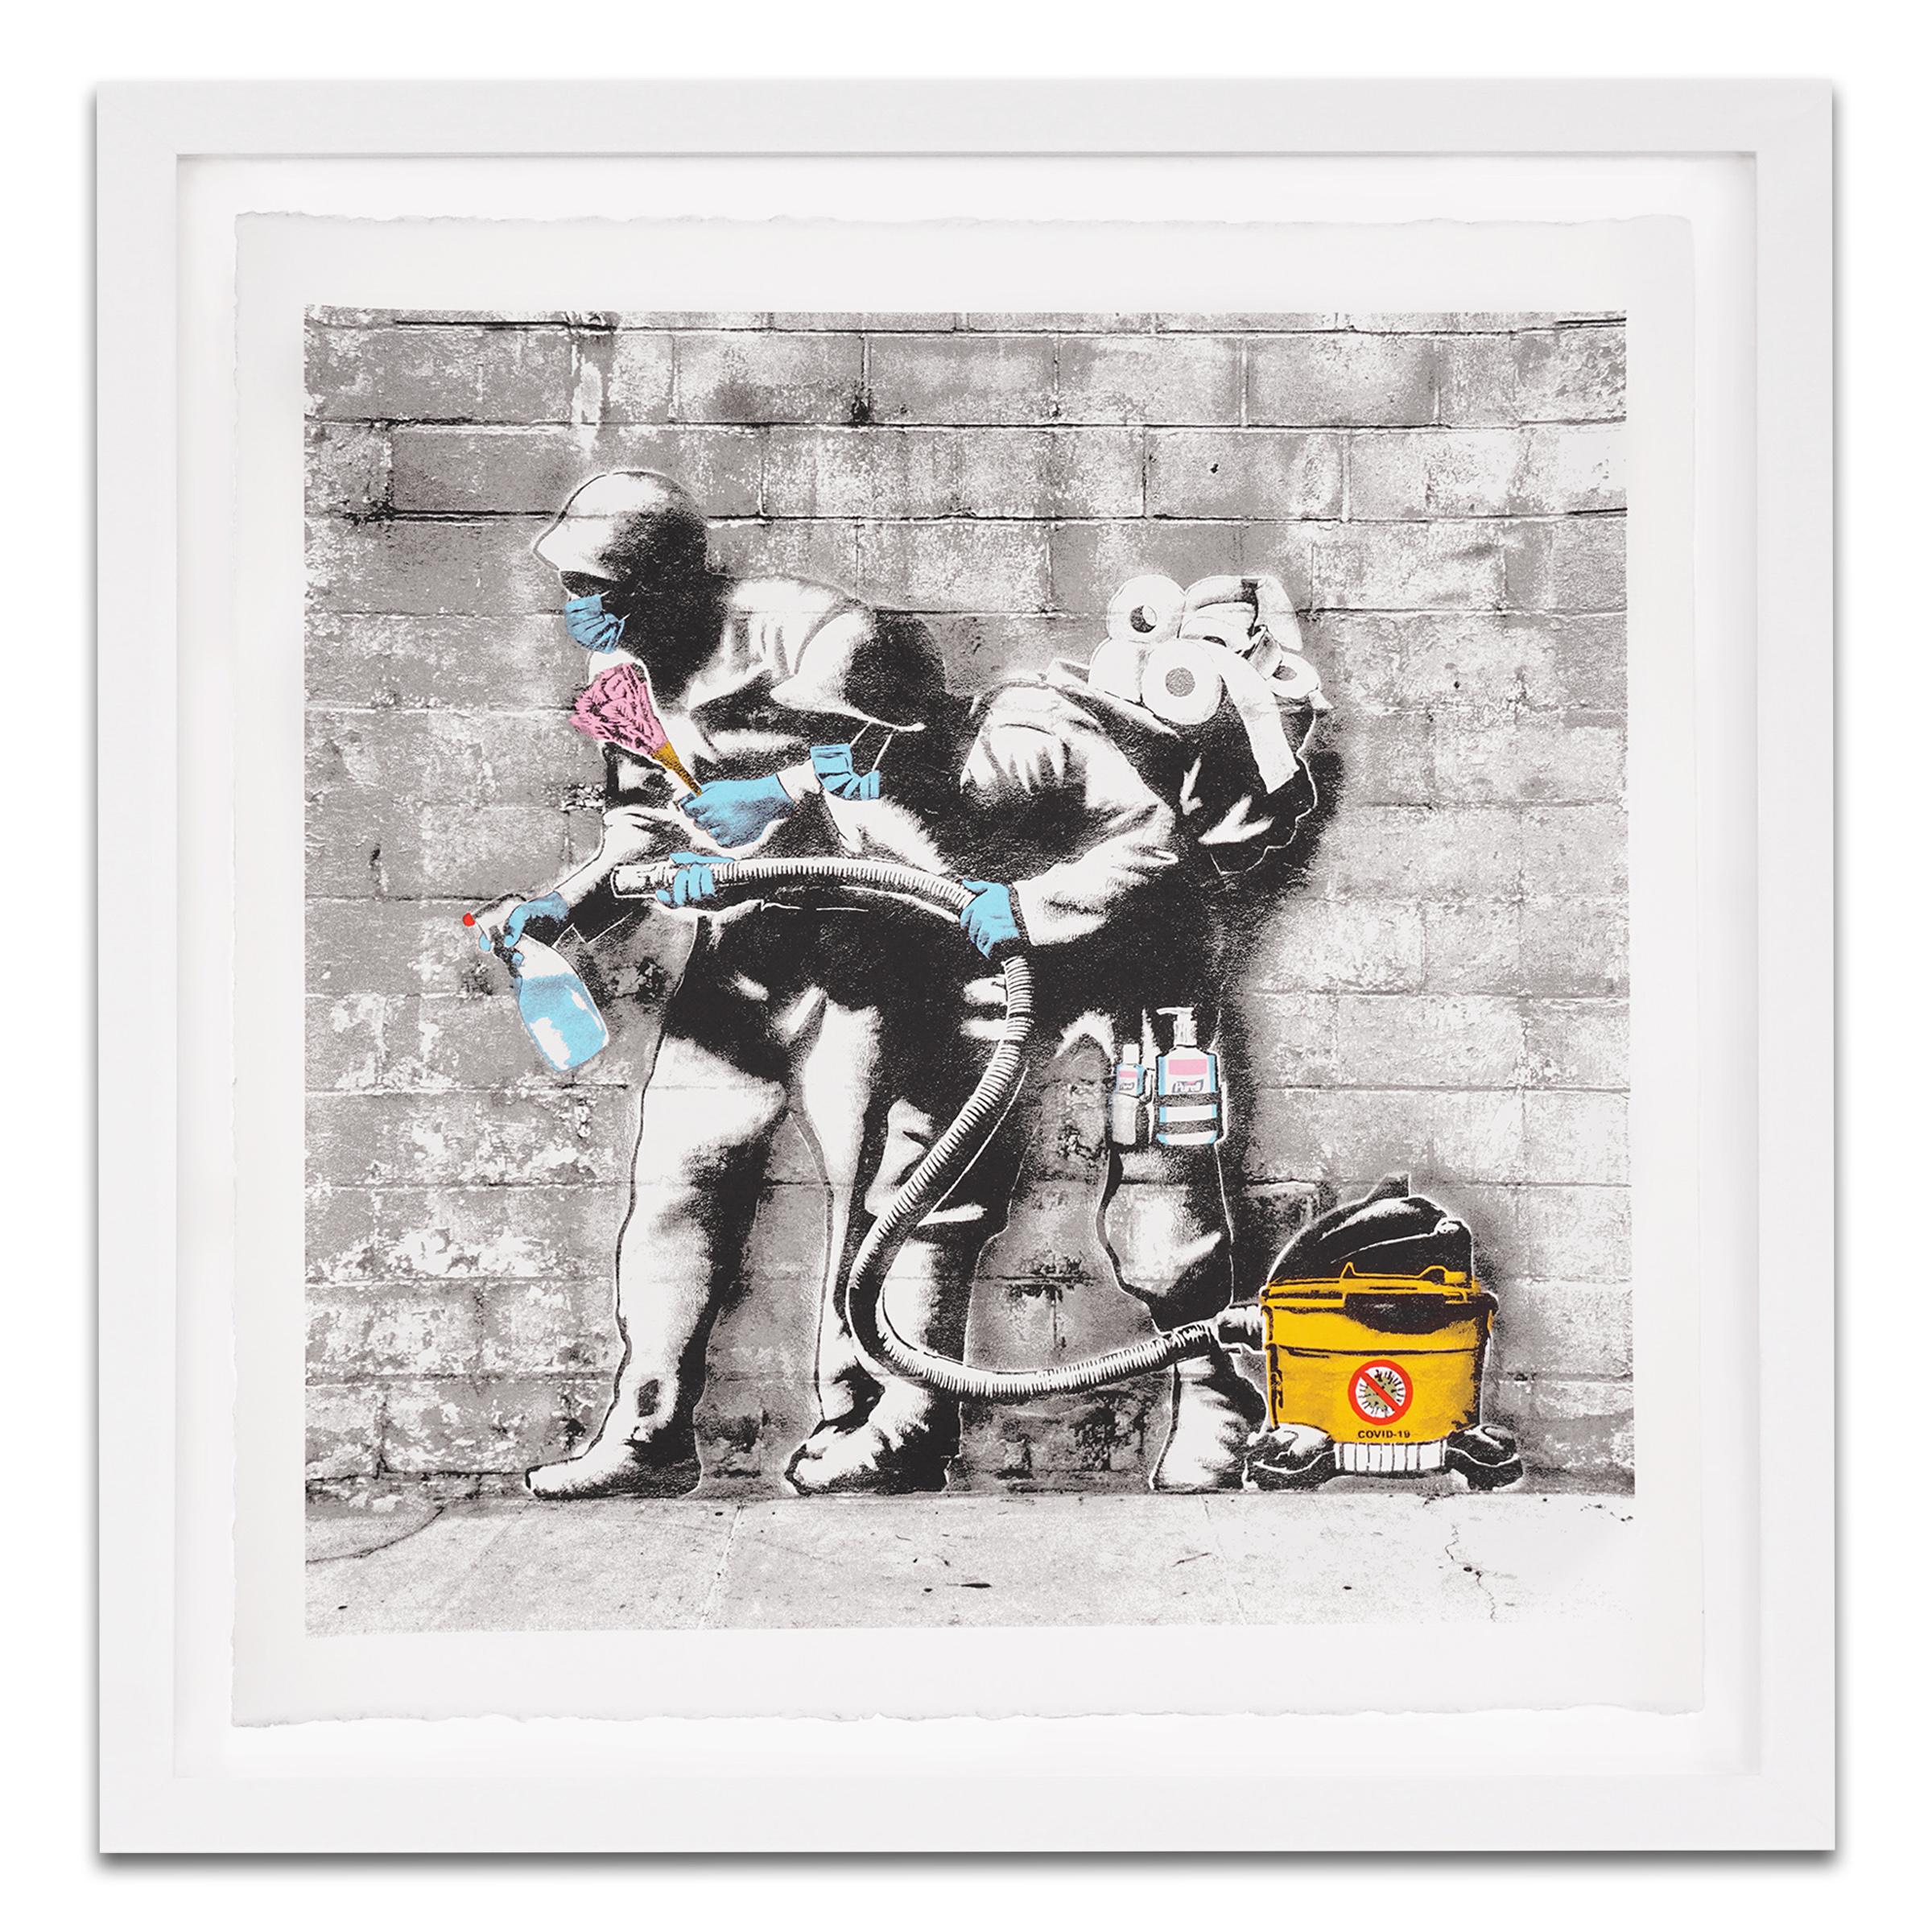 The charity street pop art silkscreen print ‘Pandemonium’ is one of Hijack’s latest limited edition contemporary works created in 2020 as a fundraising effort for the Global Food Bank. The work incorporates urban landscape graffiti style imagery